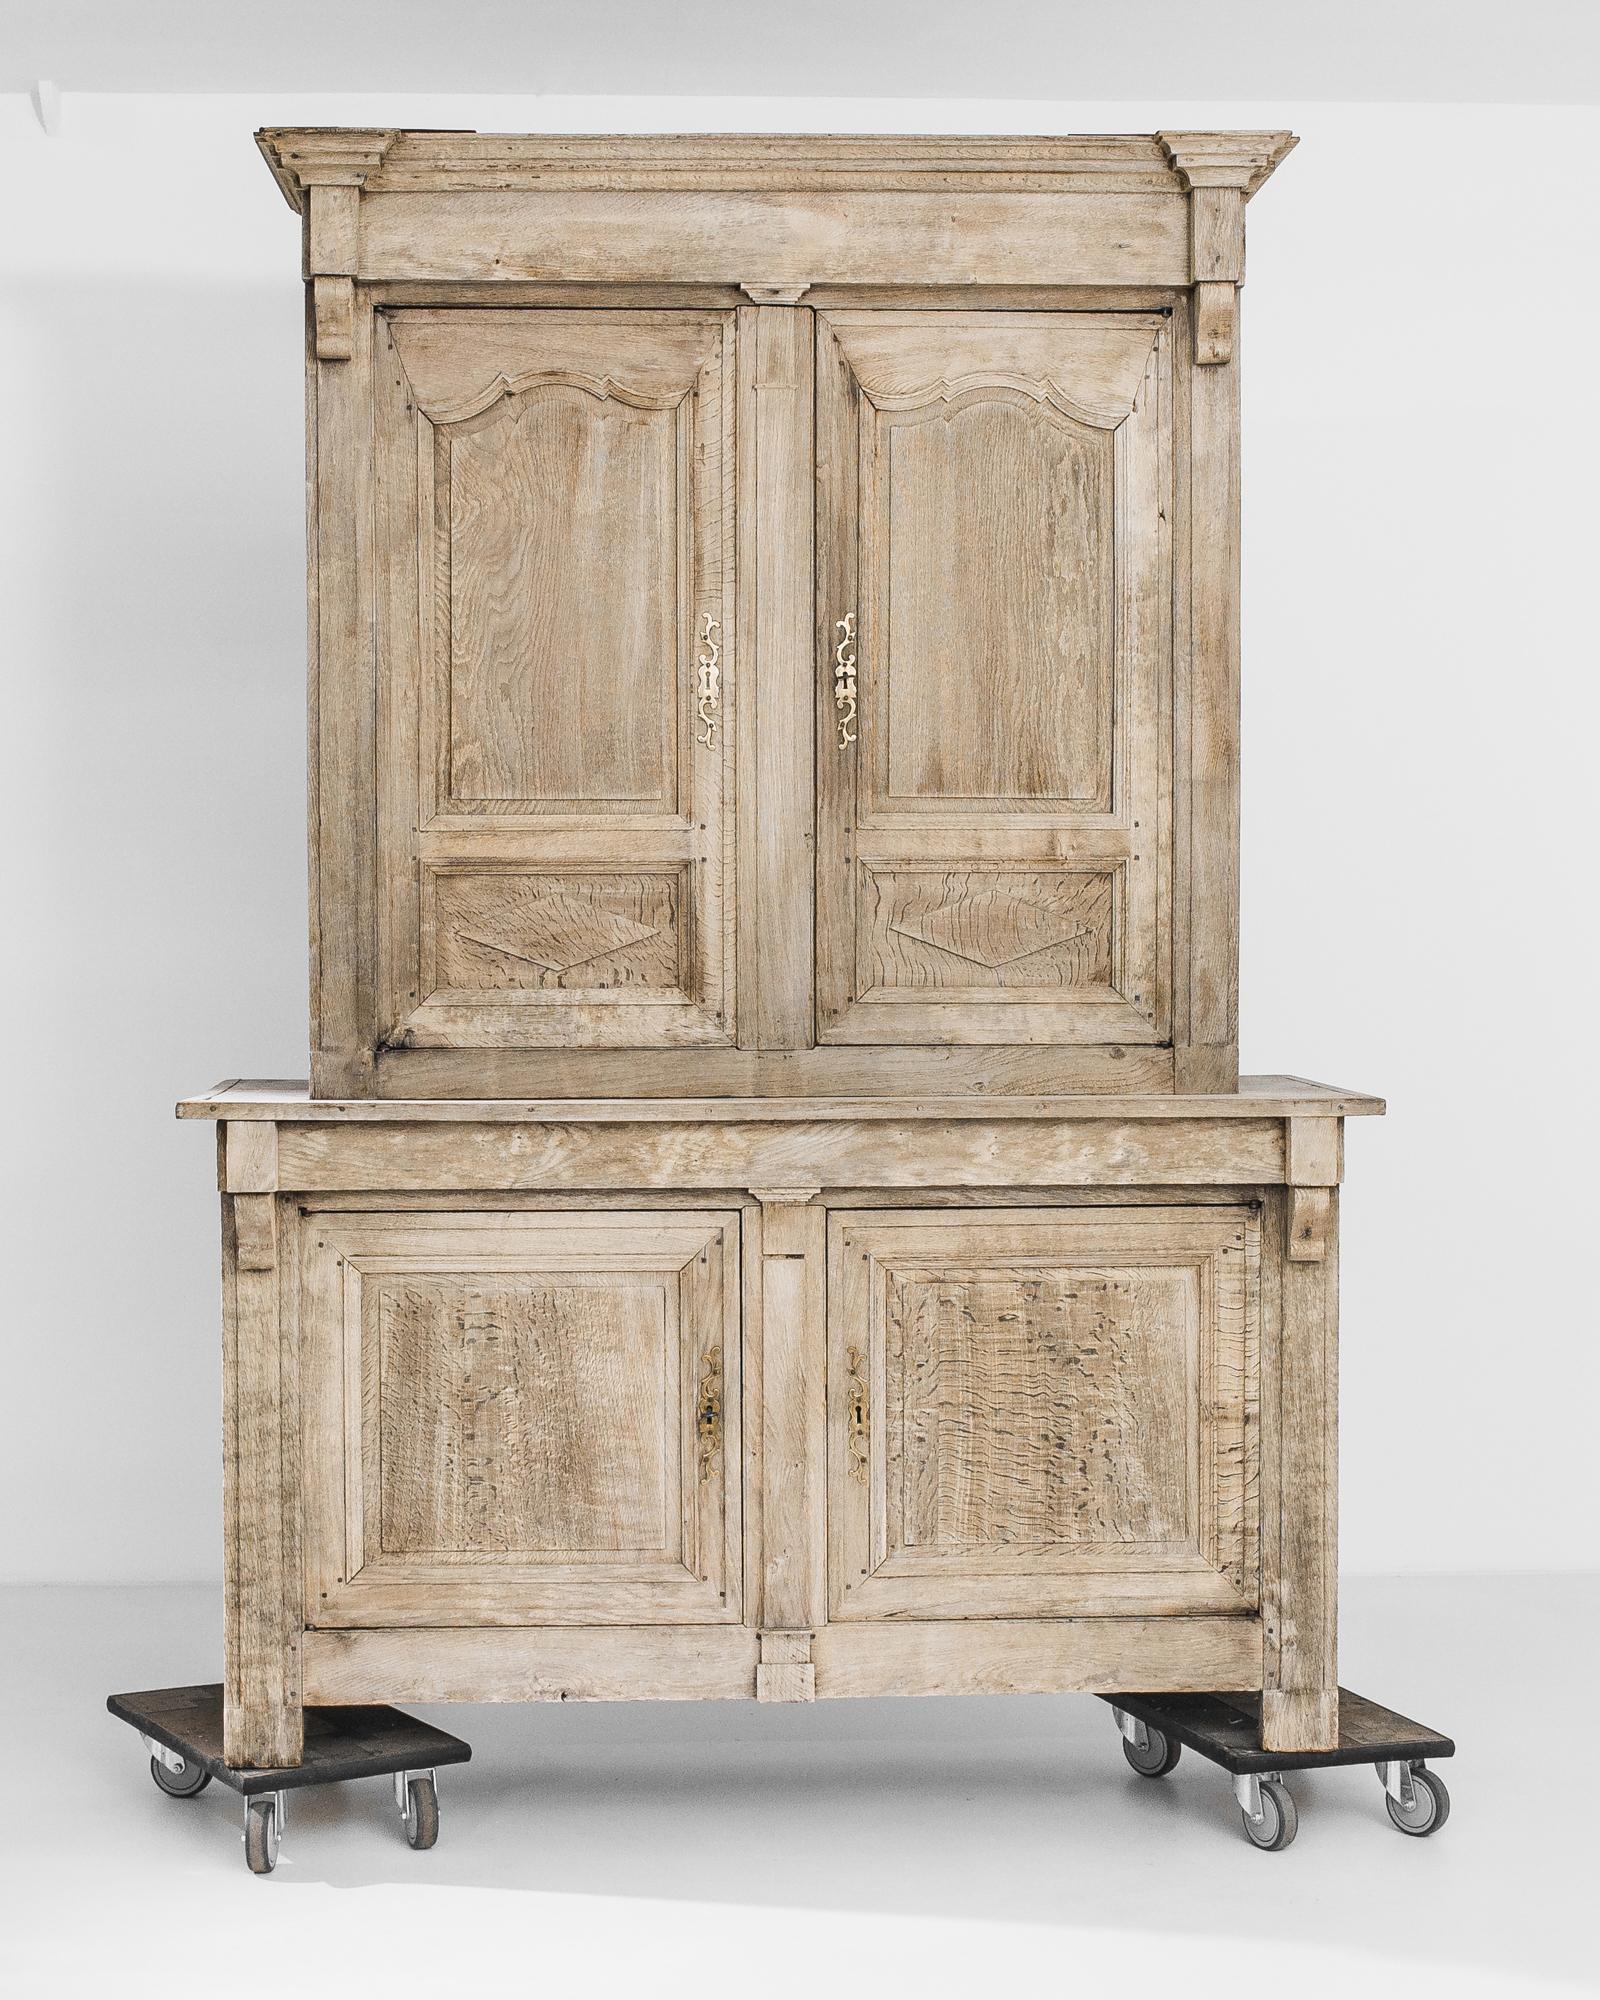 A bleached oak cabinet from France, produced circa 1860. A titan of a cabinet standing over seven feet six inches tall and featuring two tiers of double cabinets, this chest is sure to impress. A simple natural facade is broken up by brass